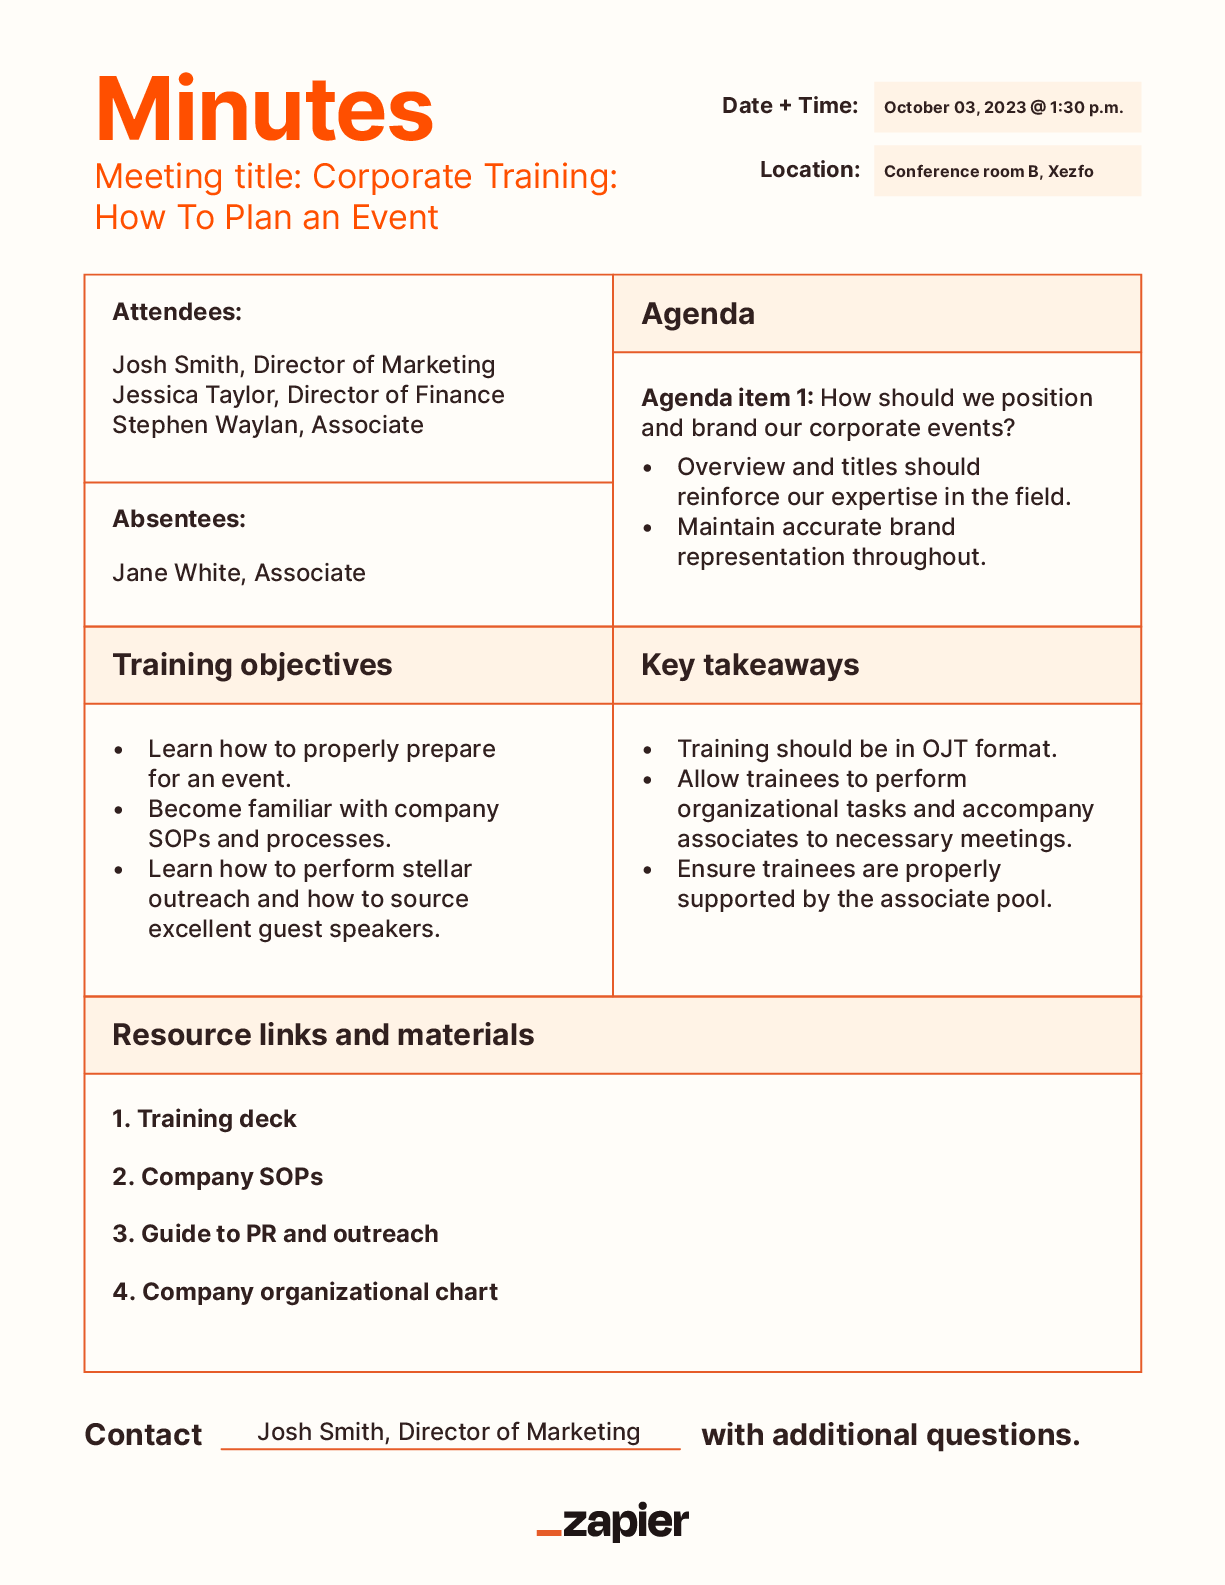 Mockup of a training meeting minutes template.